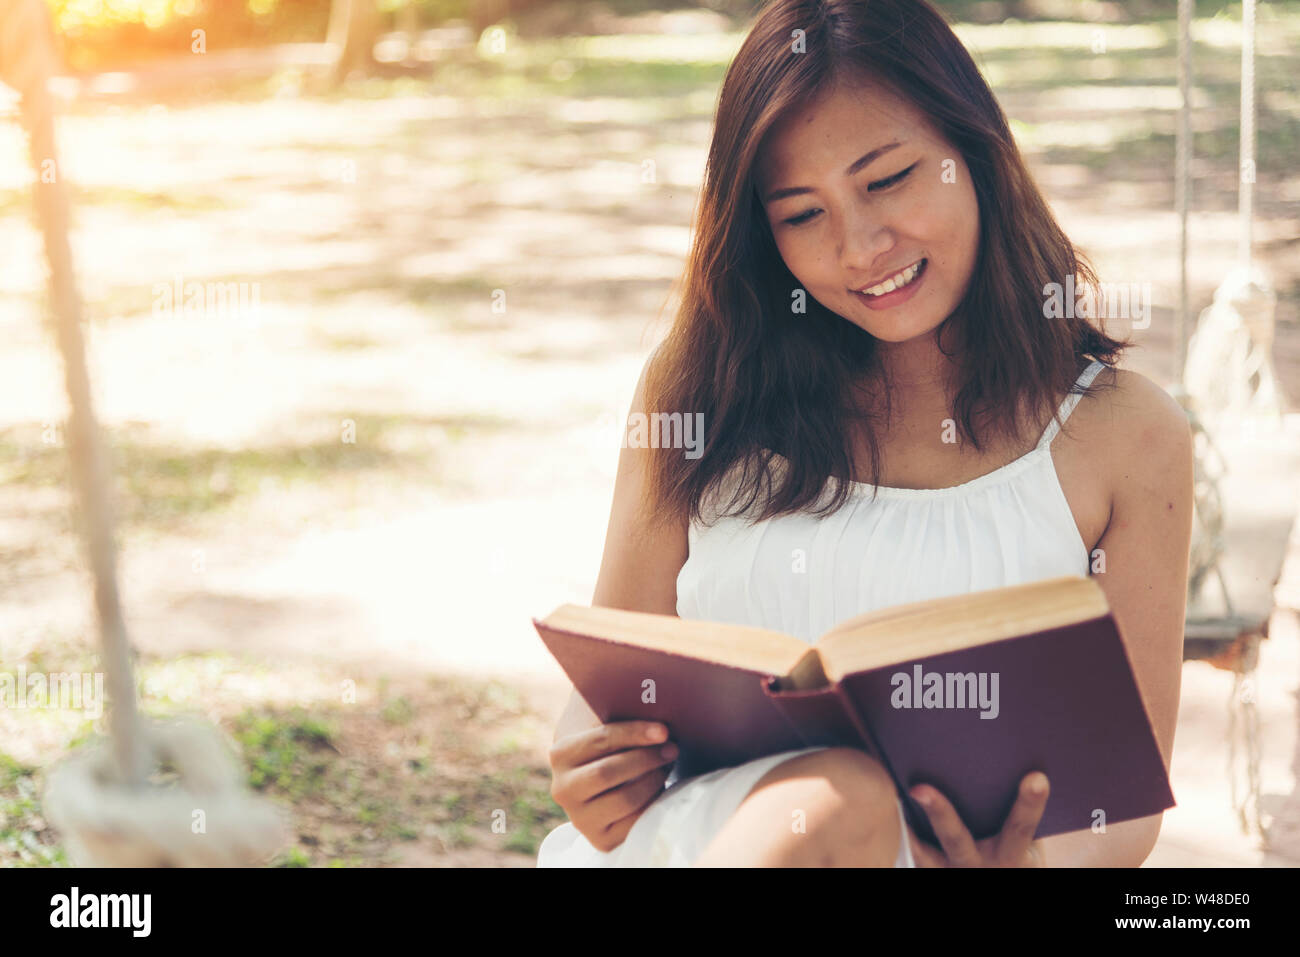 Young beautiful woman reading a book in the park with smiling face. Stock Photo